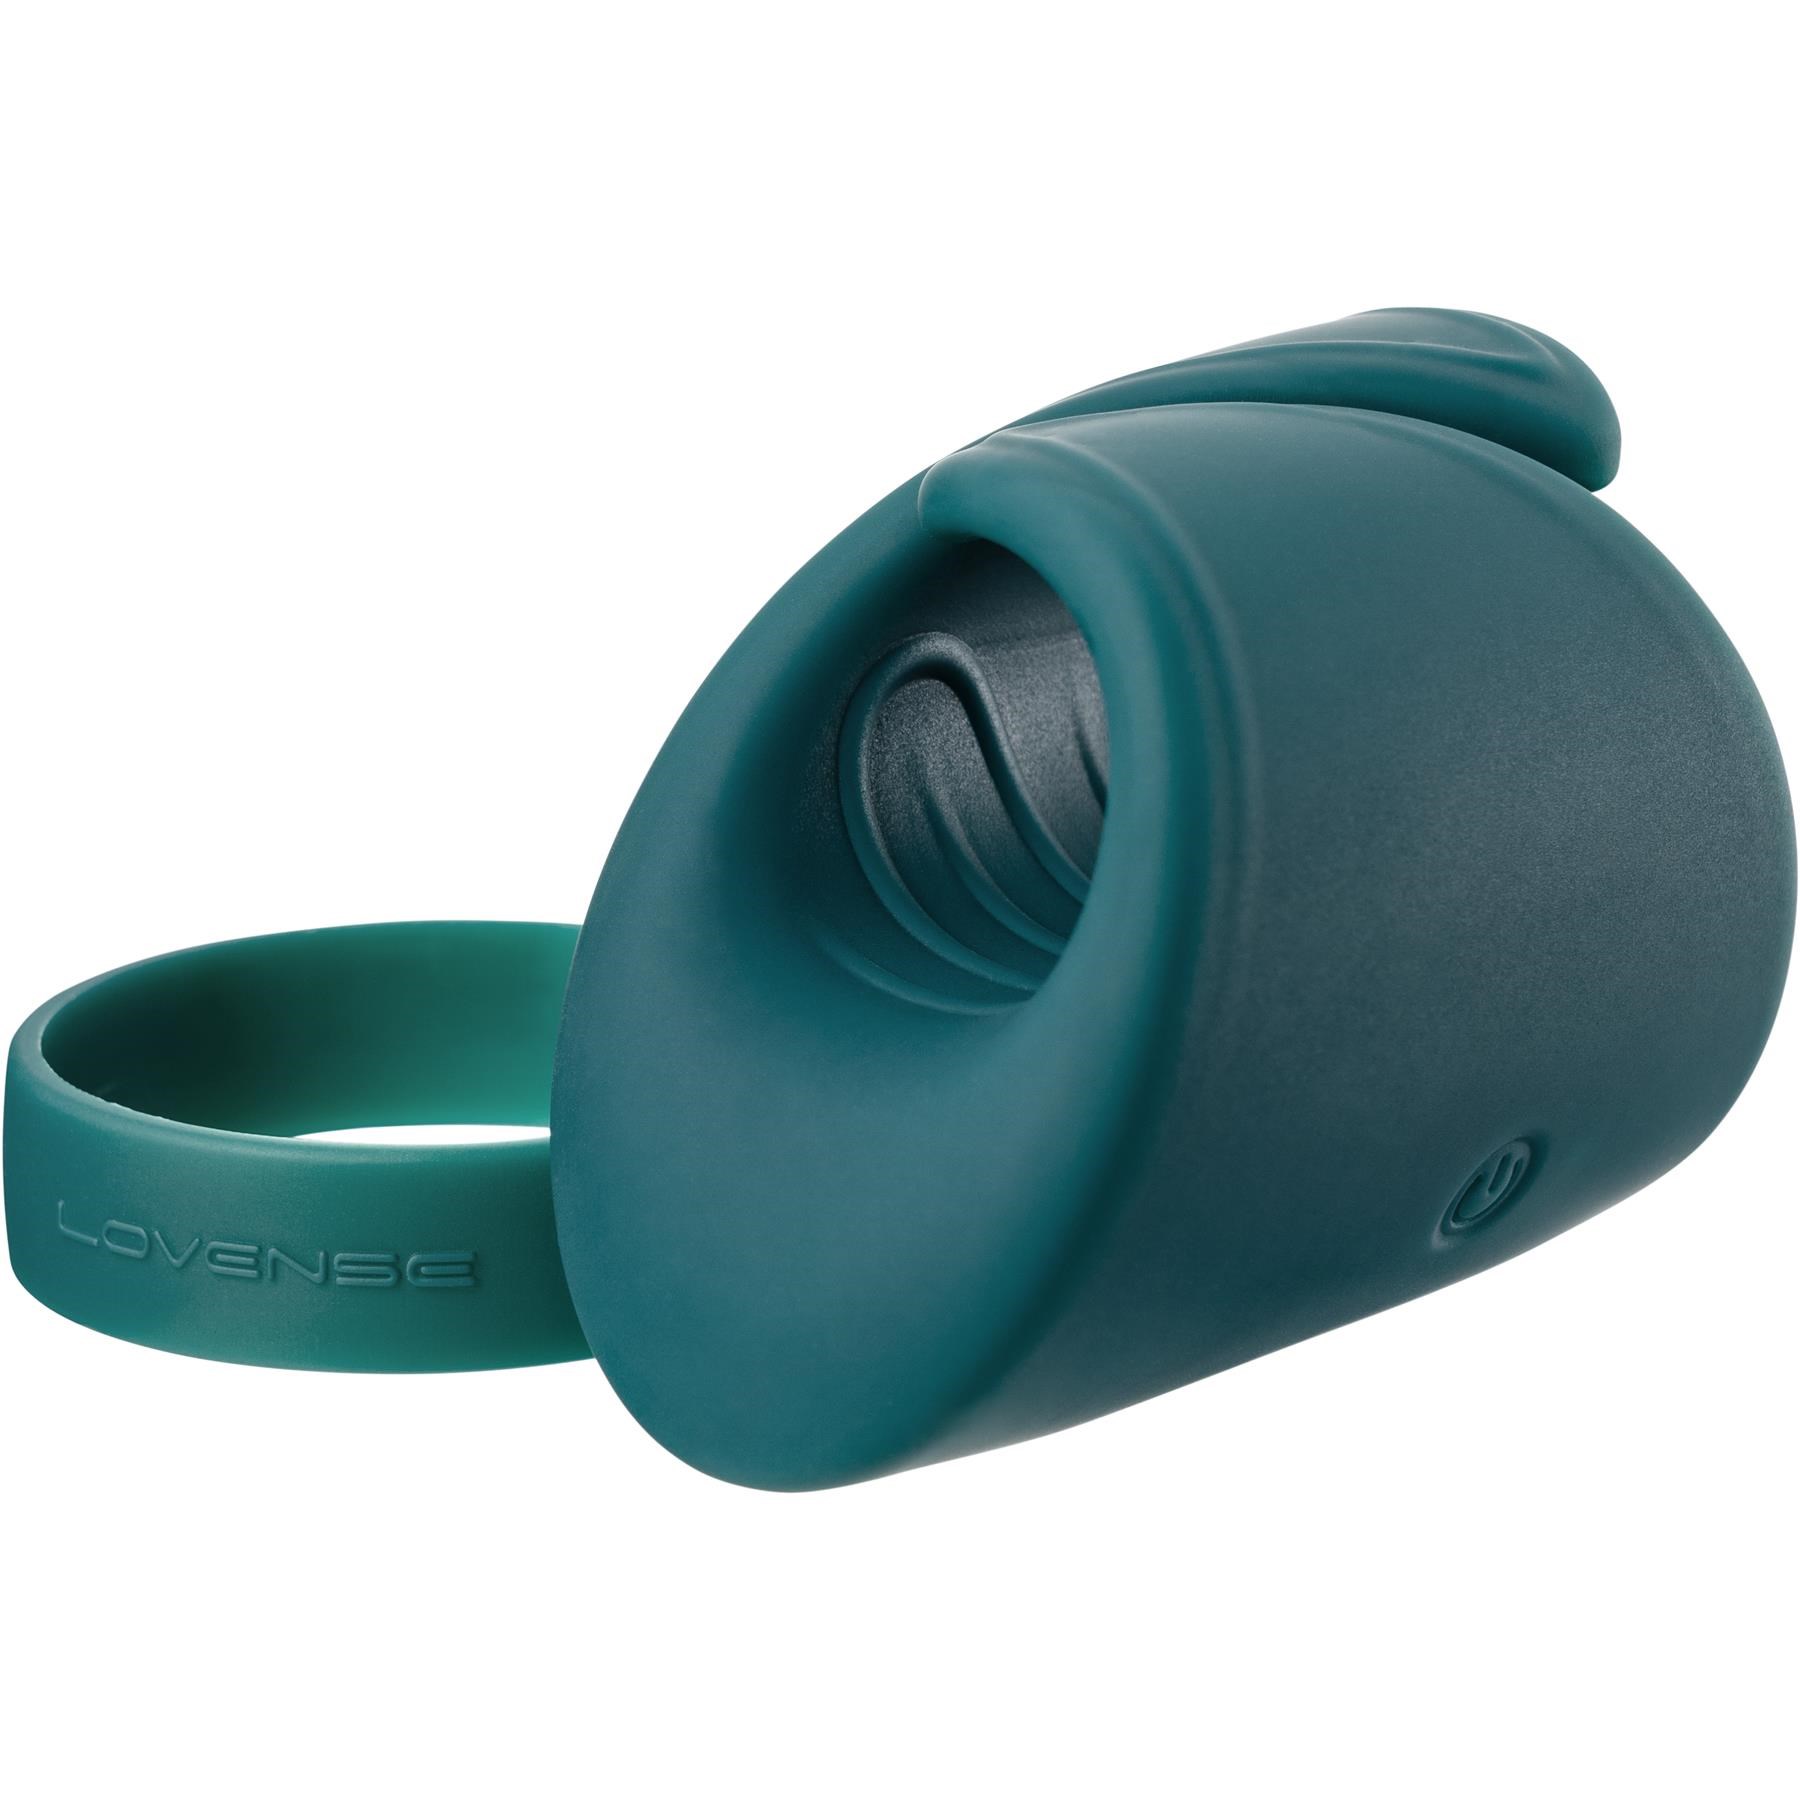 Lovense Gush Bluetooth Glans Massager - Product Shot #4 - With Ring